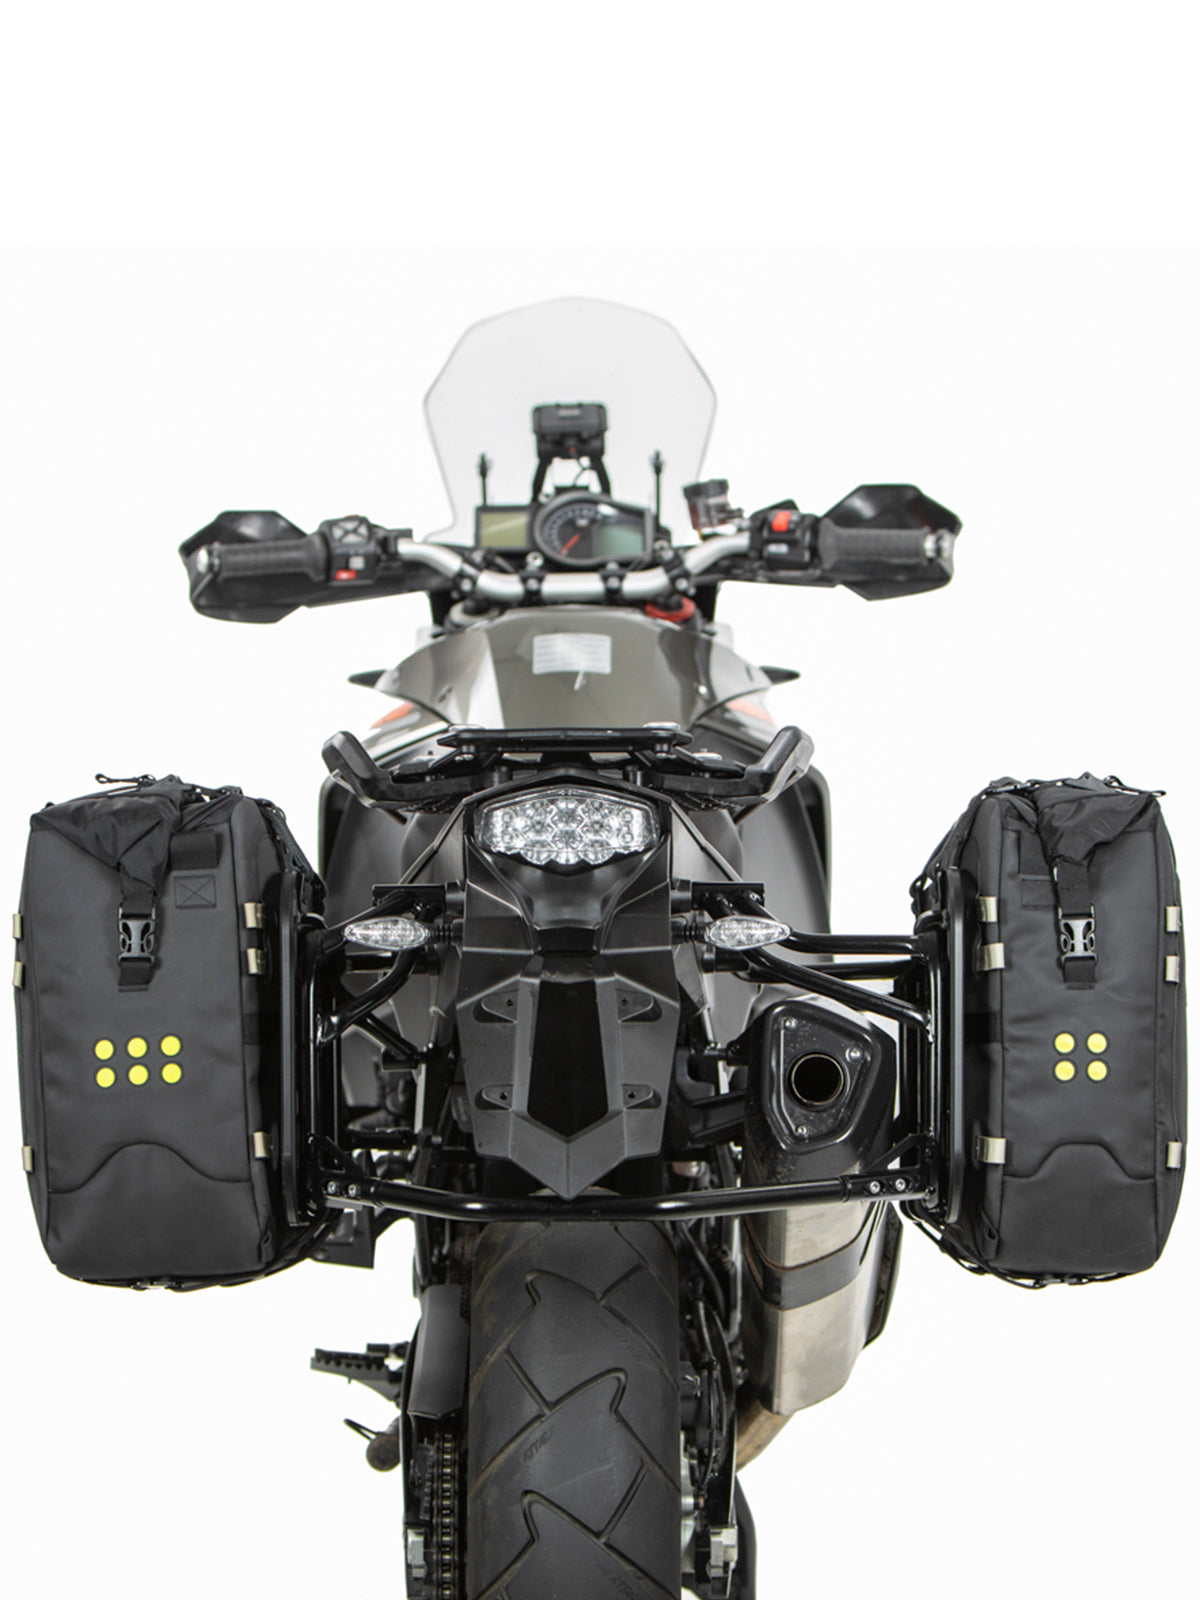 Two Kriega OS-22 Soft Panniers fitted to motorcycle